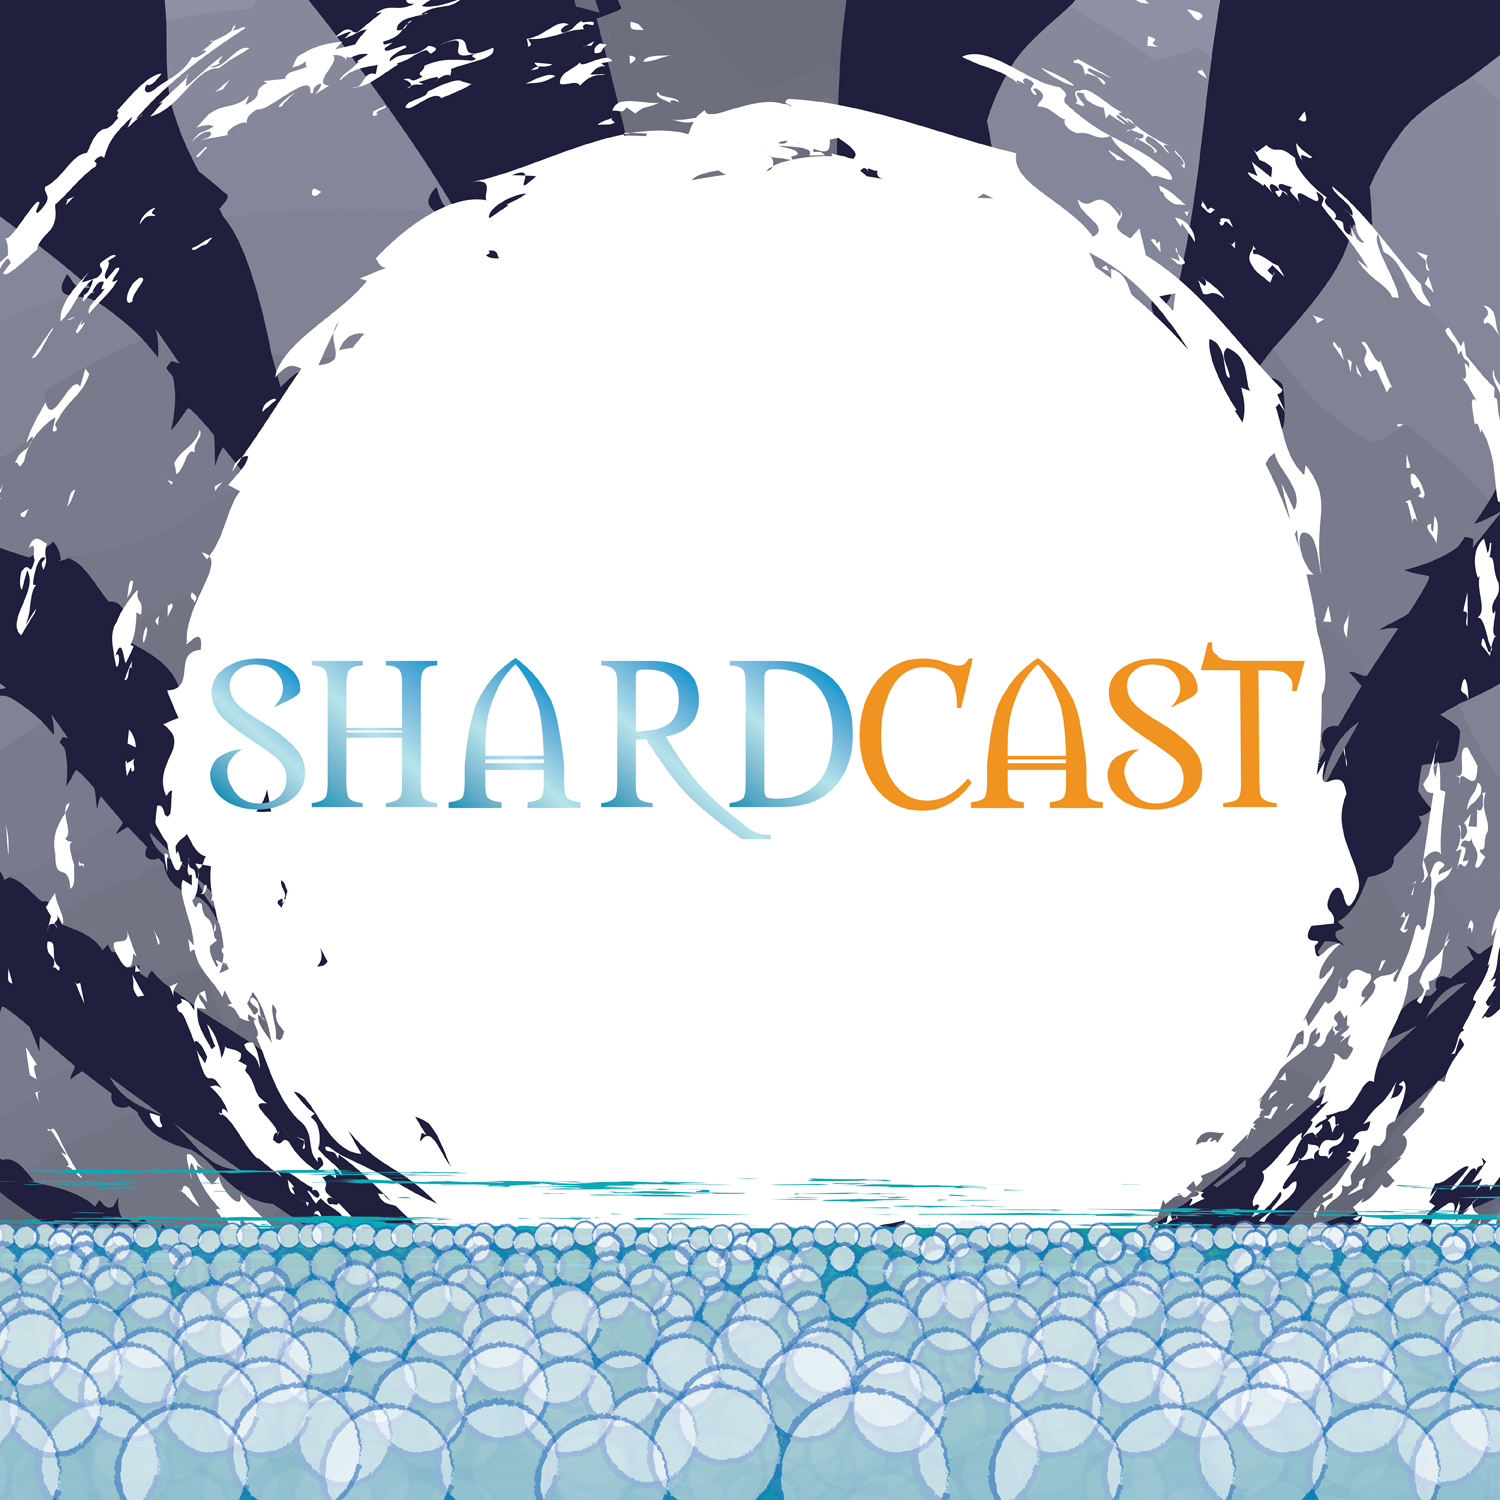 More information about "Shardcast: Shallan's Past"